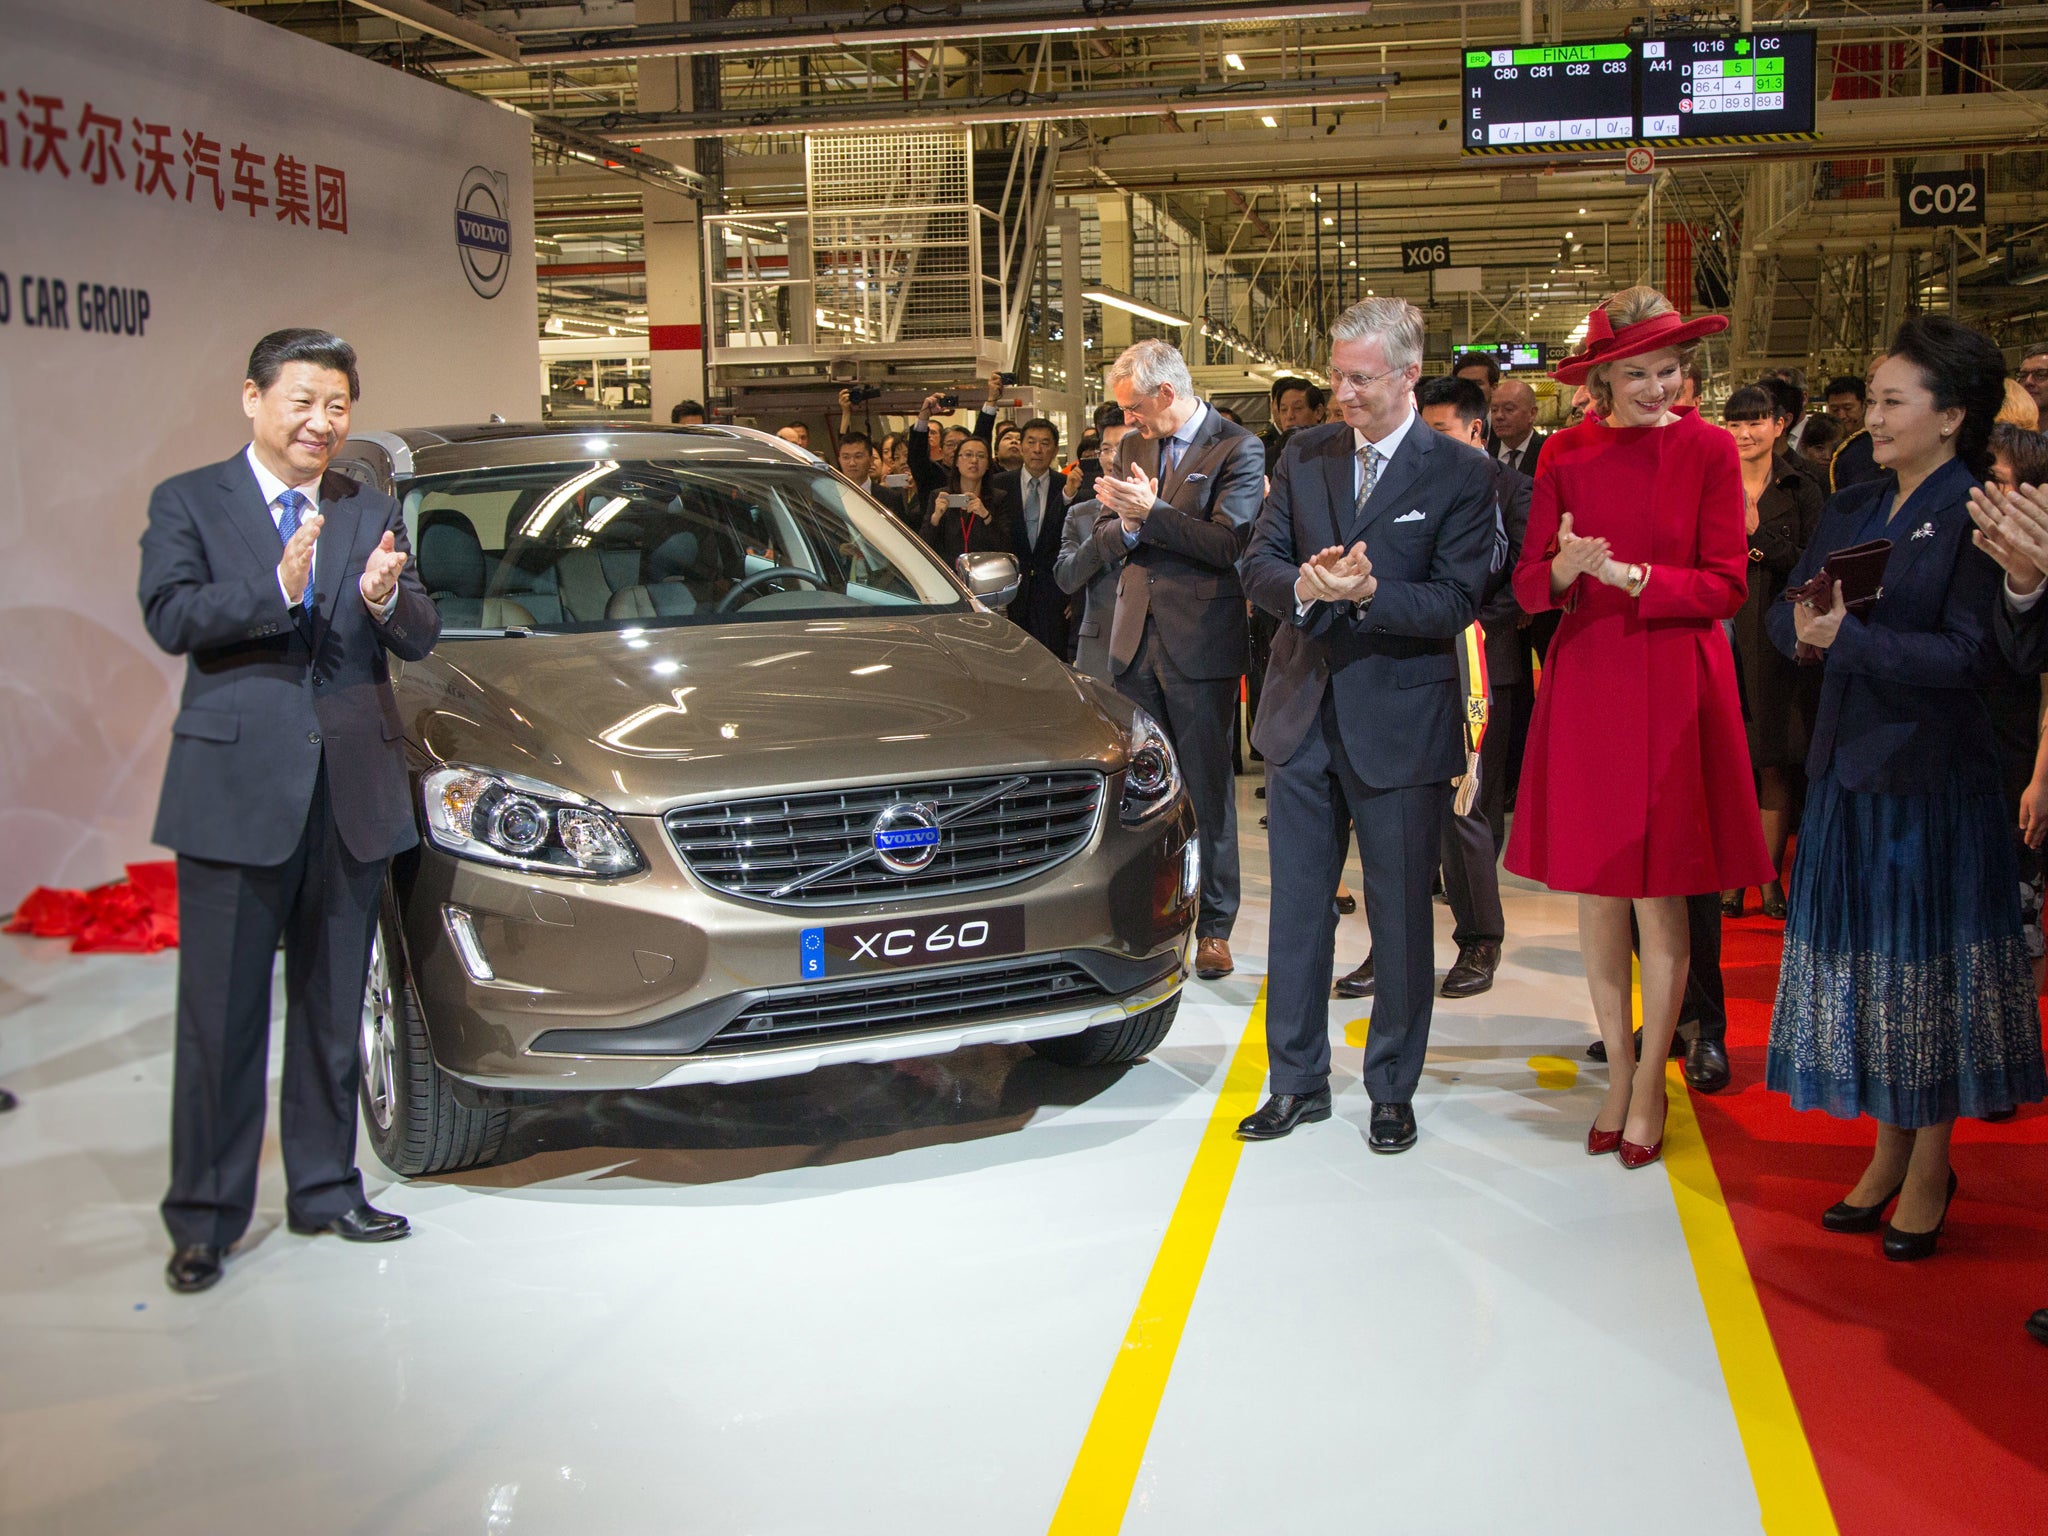 Chinese President Xi Jinping, Flemish Minister-President Kris Peeters, King Philippe of Belgium, Queen Mathilde of Belgium and Peng Liyuan, wife of the Chinese President, applaud after the unveiling of a Volvo XC60 during a visit to car manufacturer Volvo